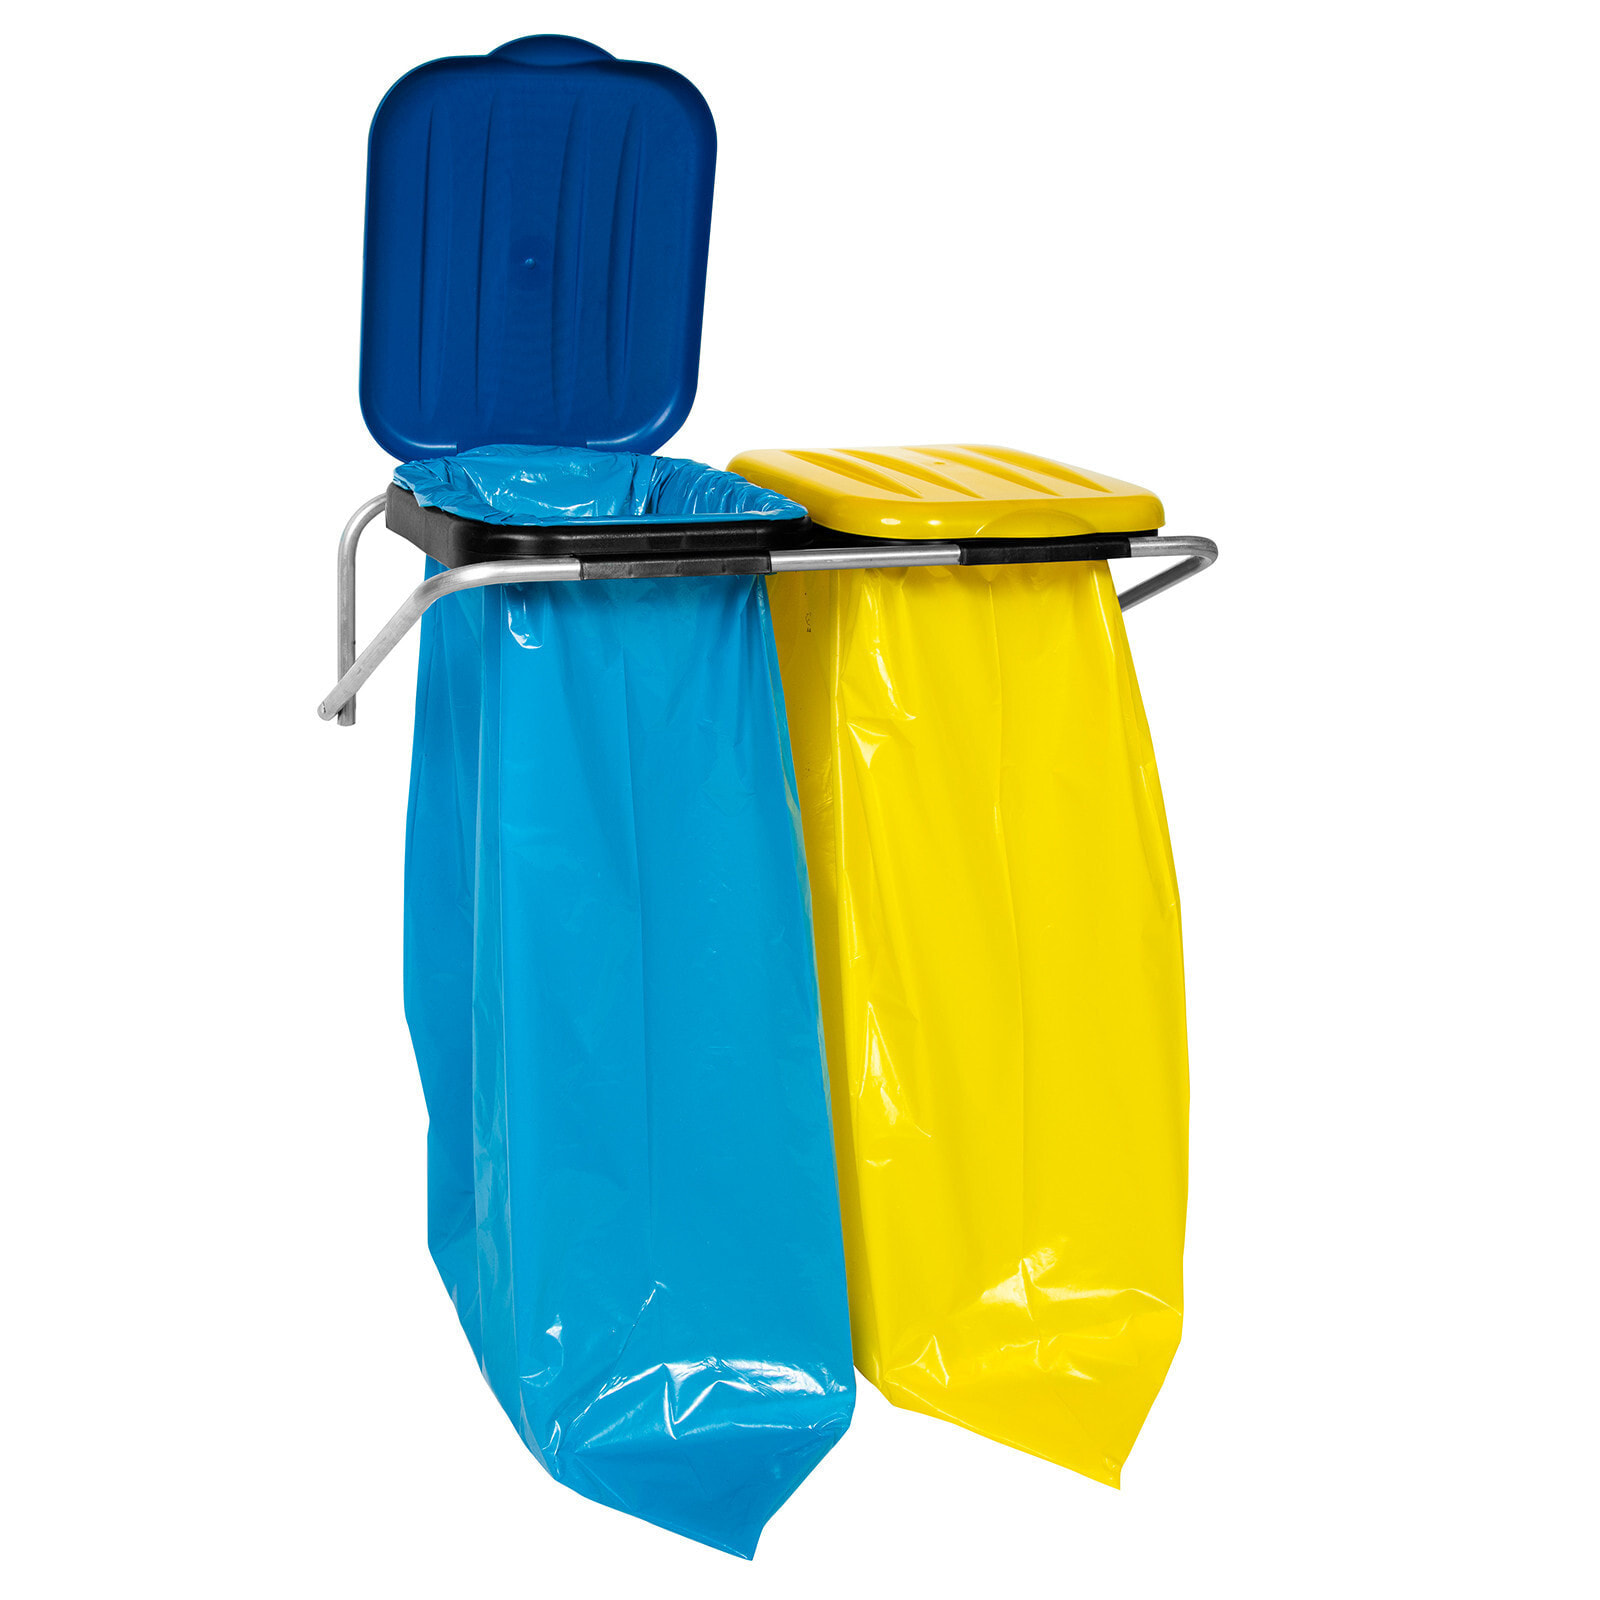 Hanging wall holder for waste segregation 2 colors - 120L bags